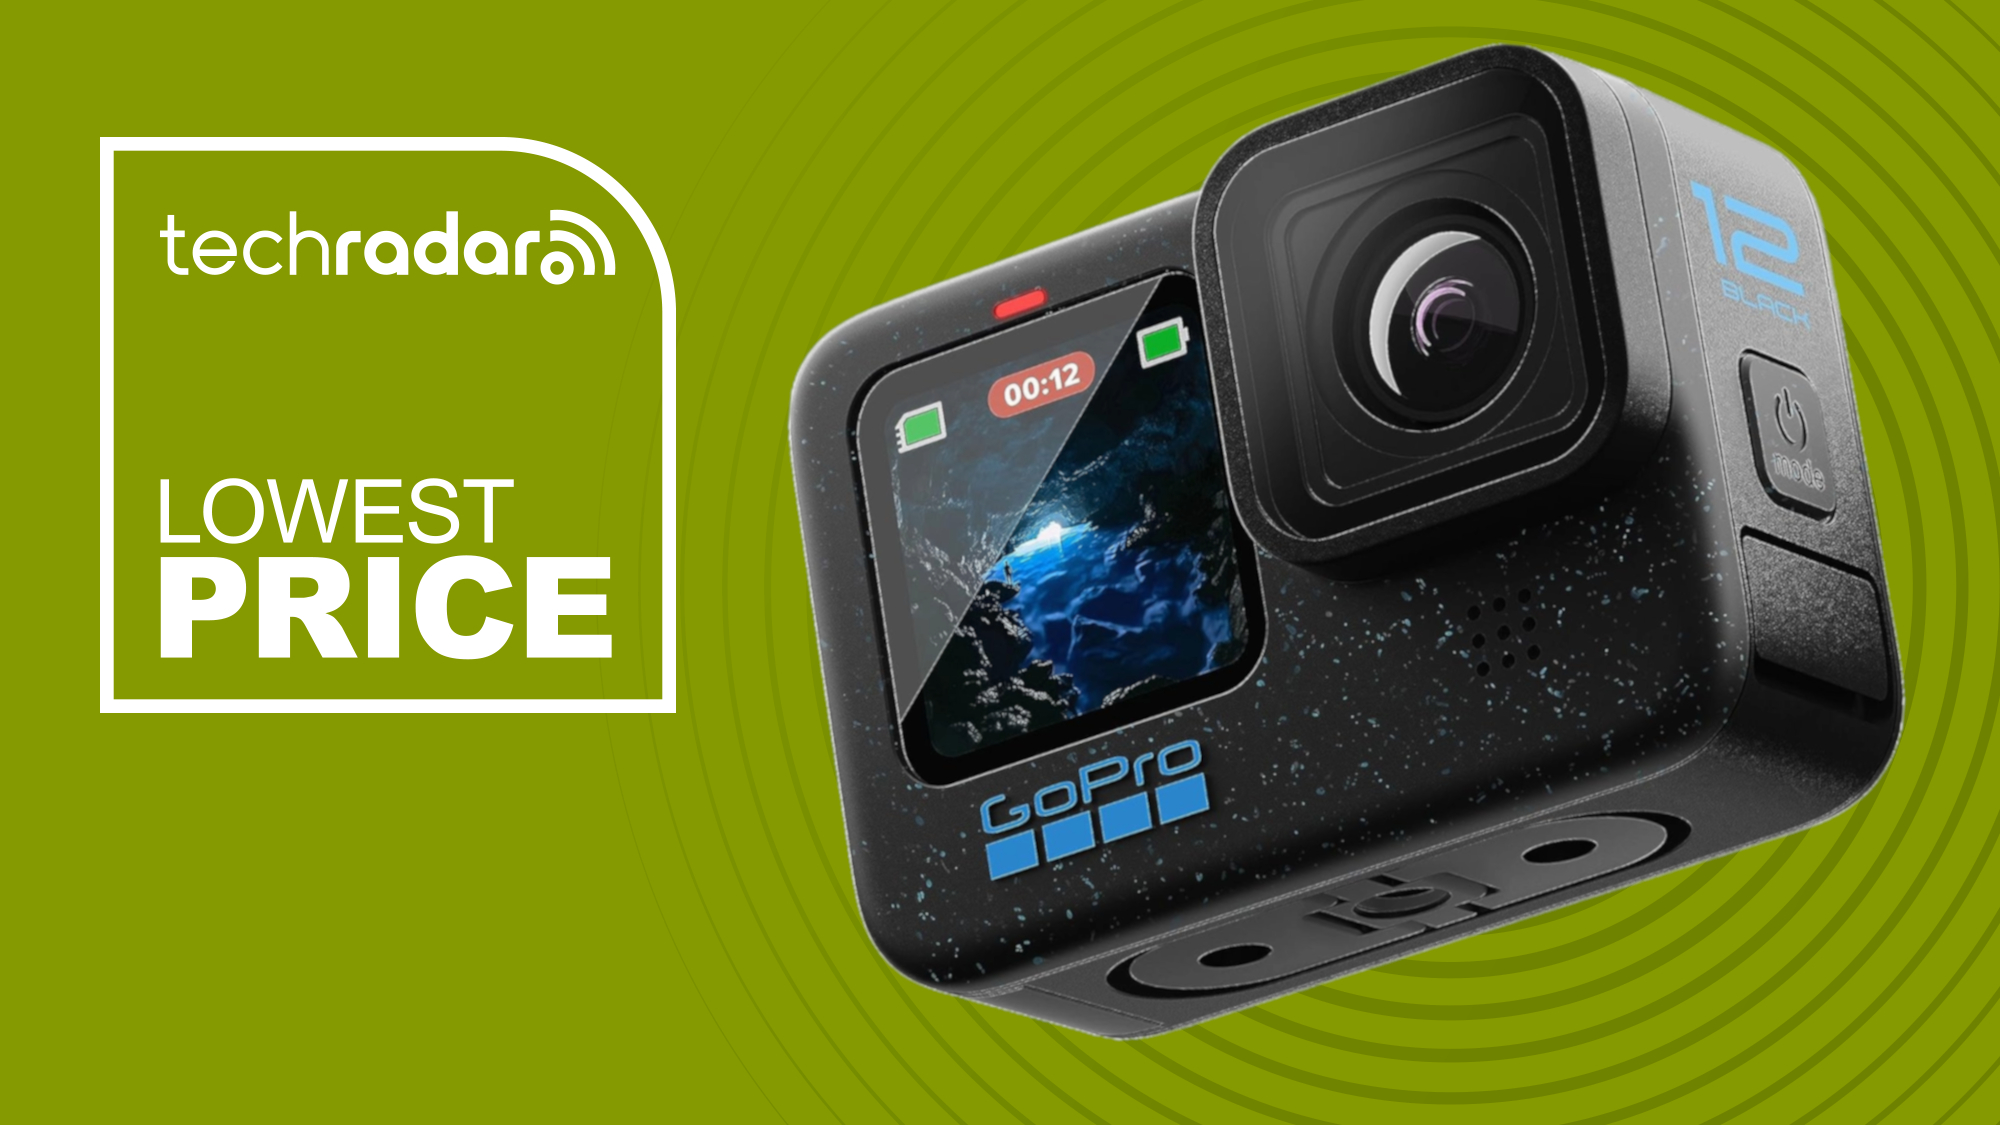 The new GoPro Hero 12 Black is now on sale but this Hero 11 Black